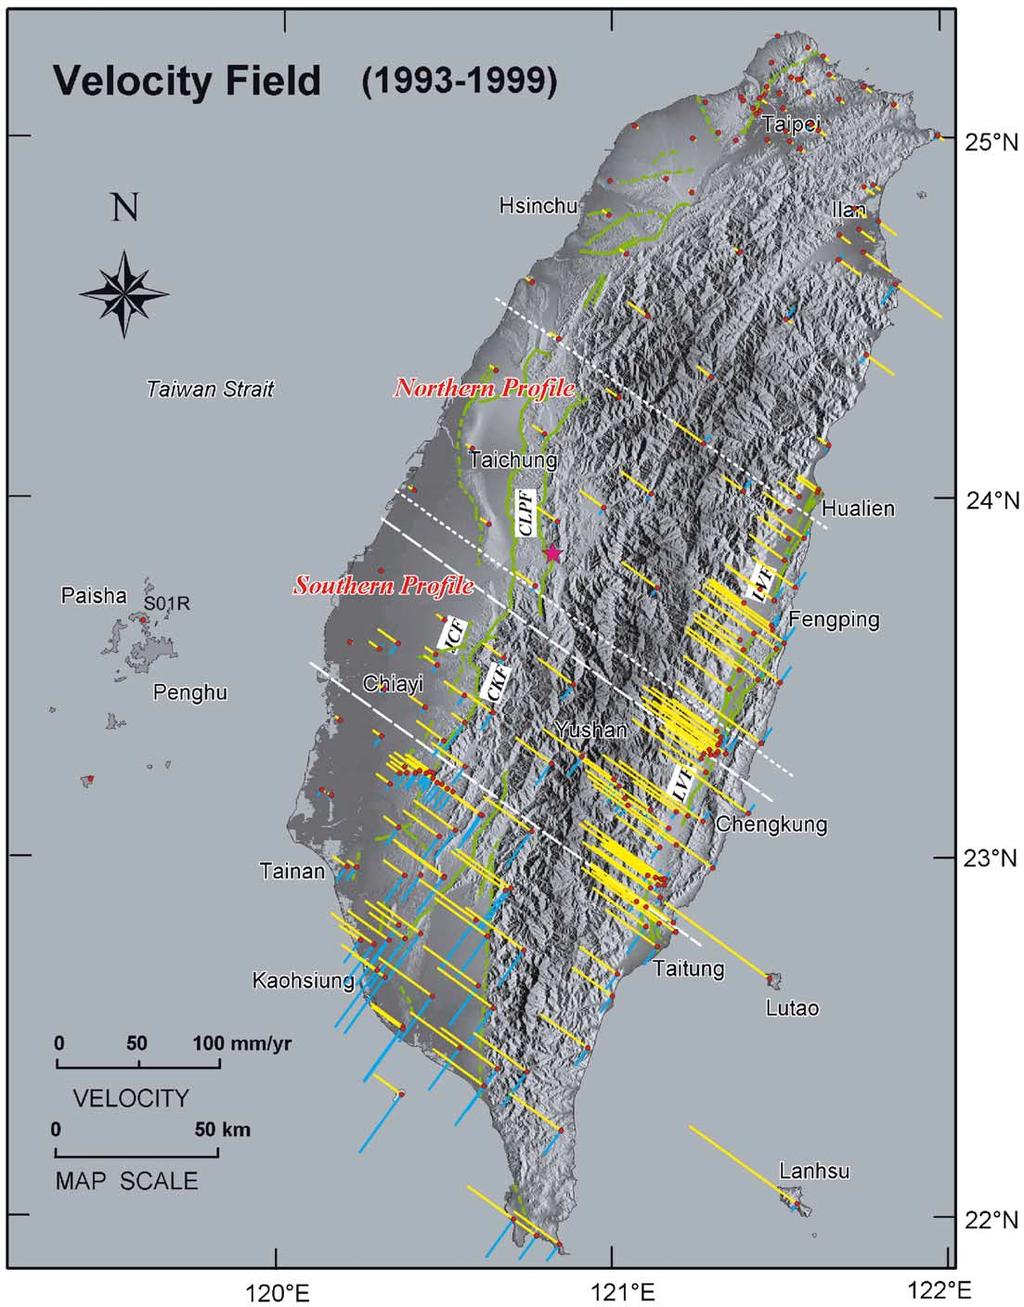 288 Y.-J. Hsu et al. / Earth and Planetary Science Letters 211 (2003) 287^294 Fig. 1. Shaded relief topographic map of Taiwan. Major faults are indicated as green lines.